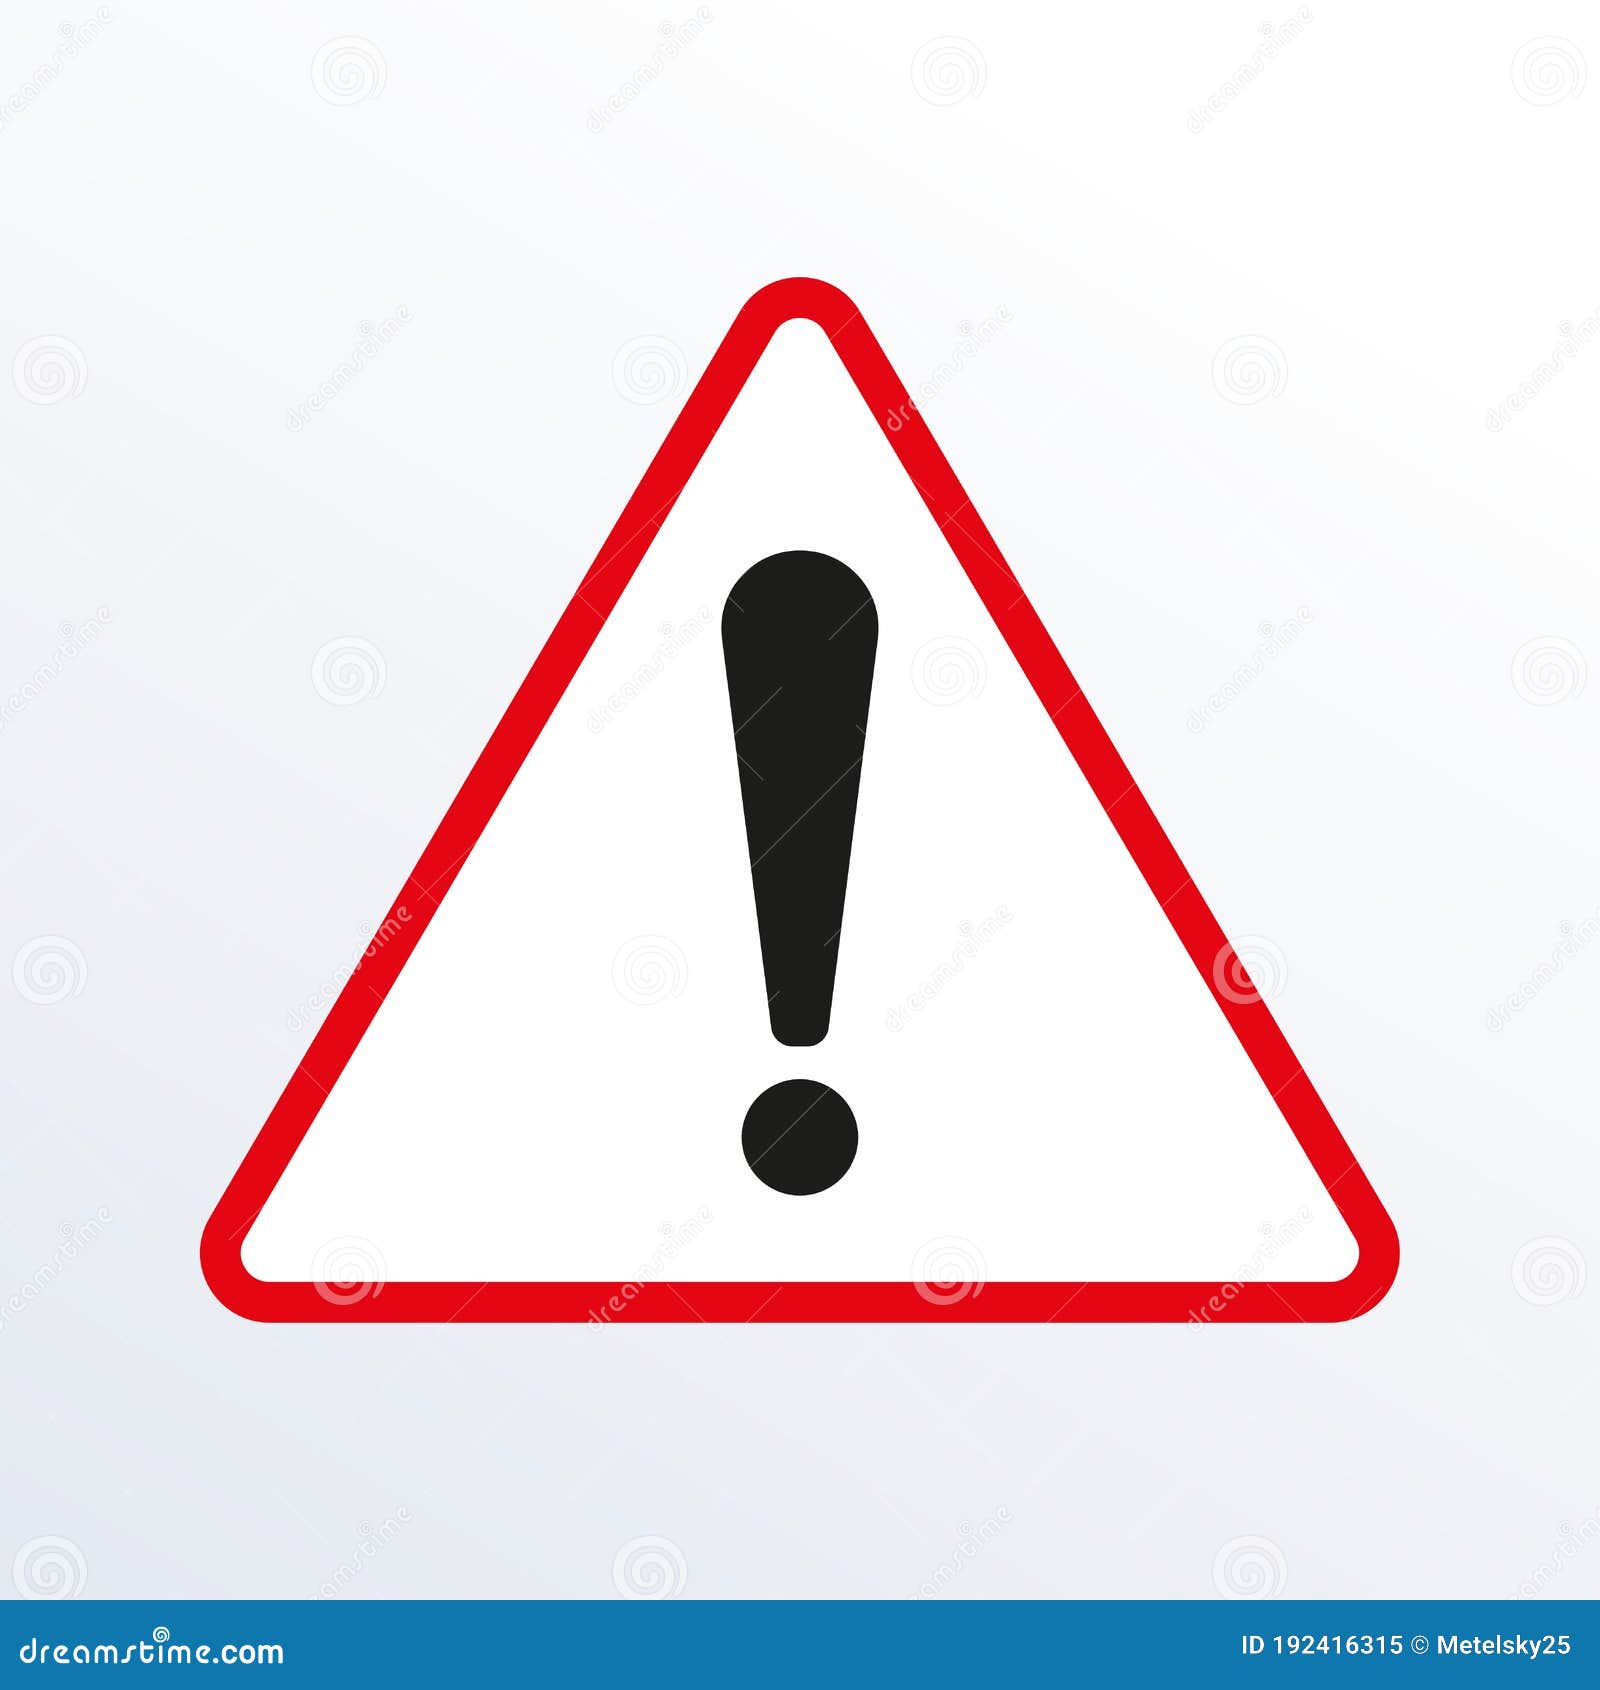 Attention Triangle Sign. Alert, Caution Warning, Hazard and Danger Icon ...